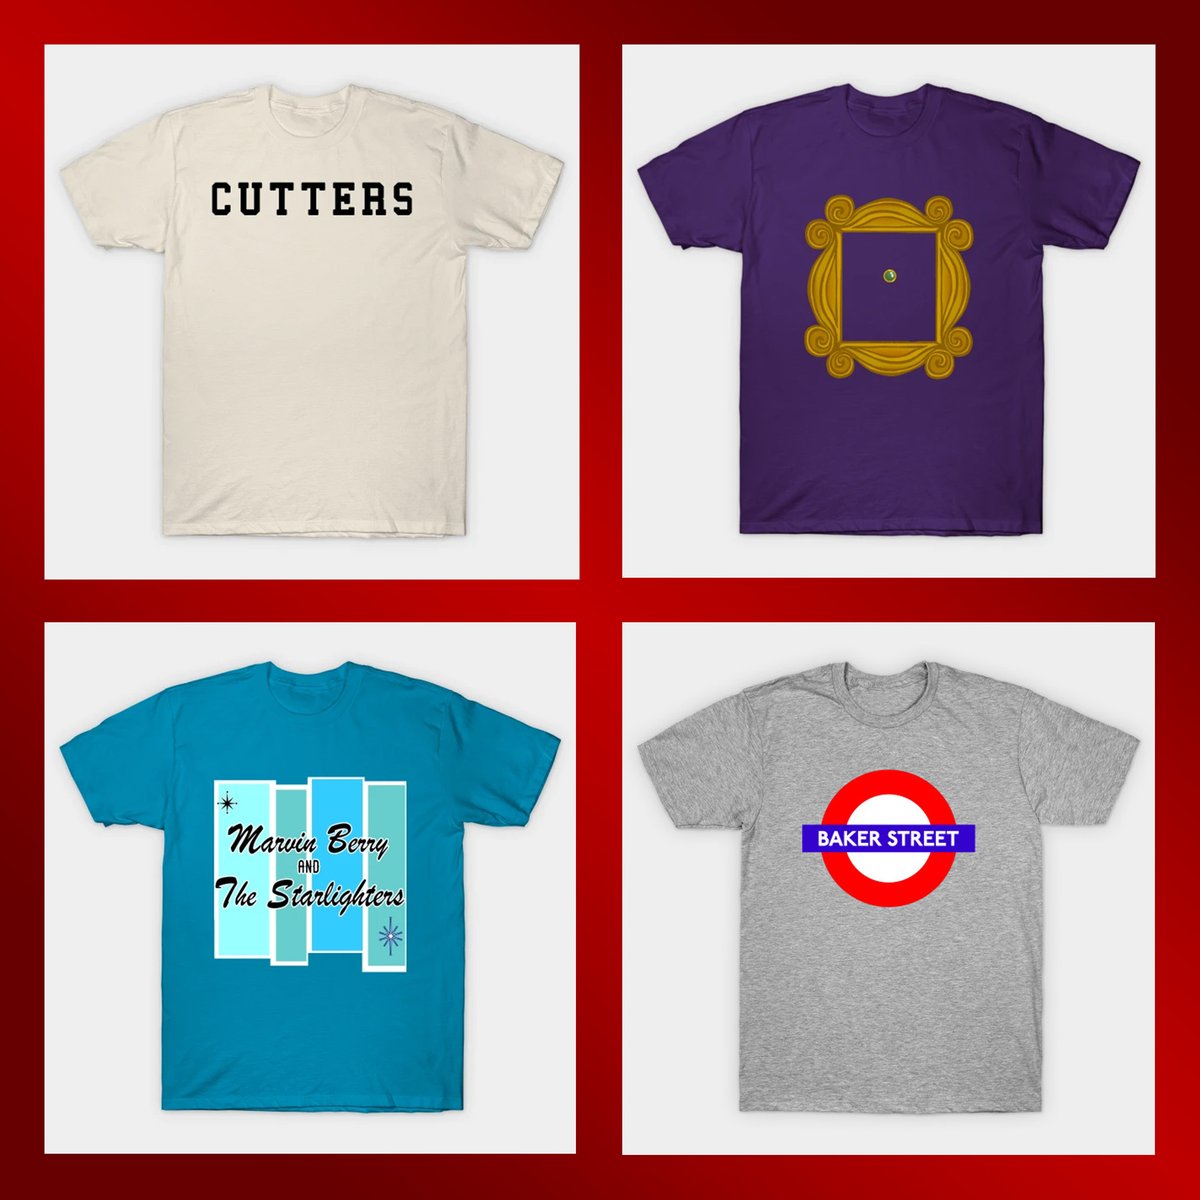 Check Out Some Of Our Best Sellers! #Cutters #BreakingAway #ApartmentFrame #Friends #MarvinBerry #BackToTheFuture #BakerStreet #SherlockHolmes #SmallBusiness #ShopSmall teepublic.com/t-shirt/226681…